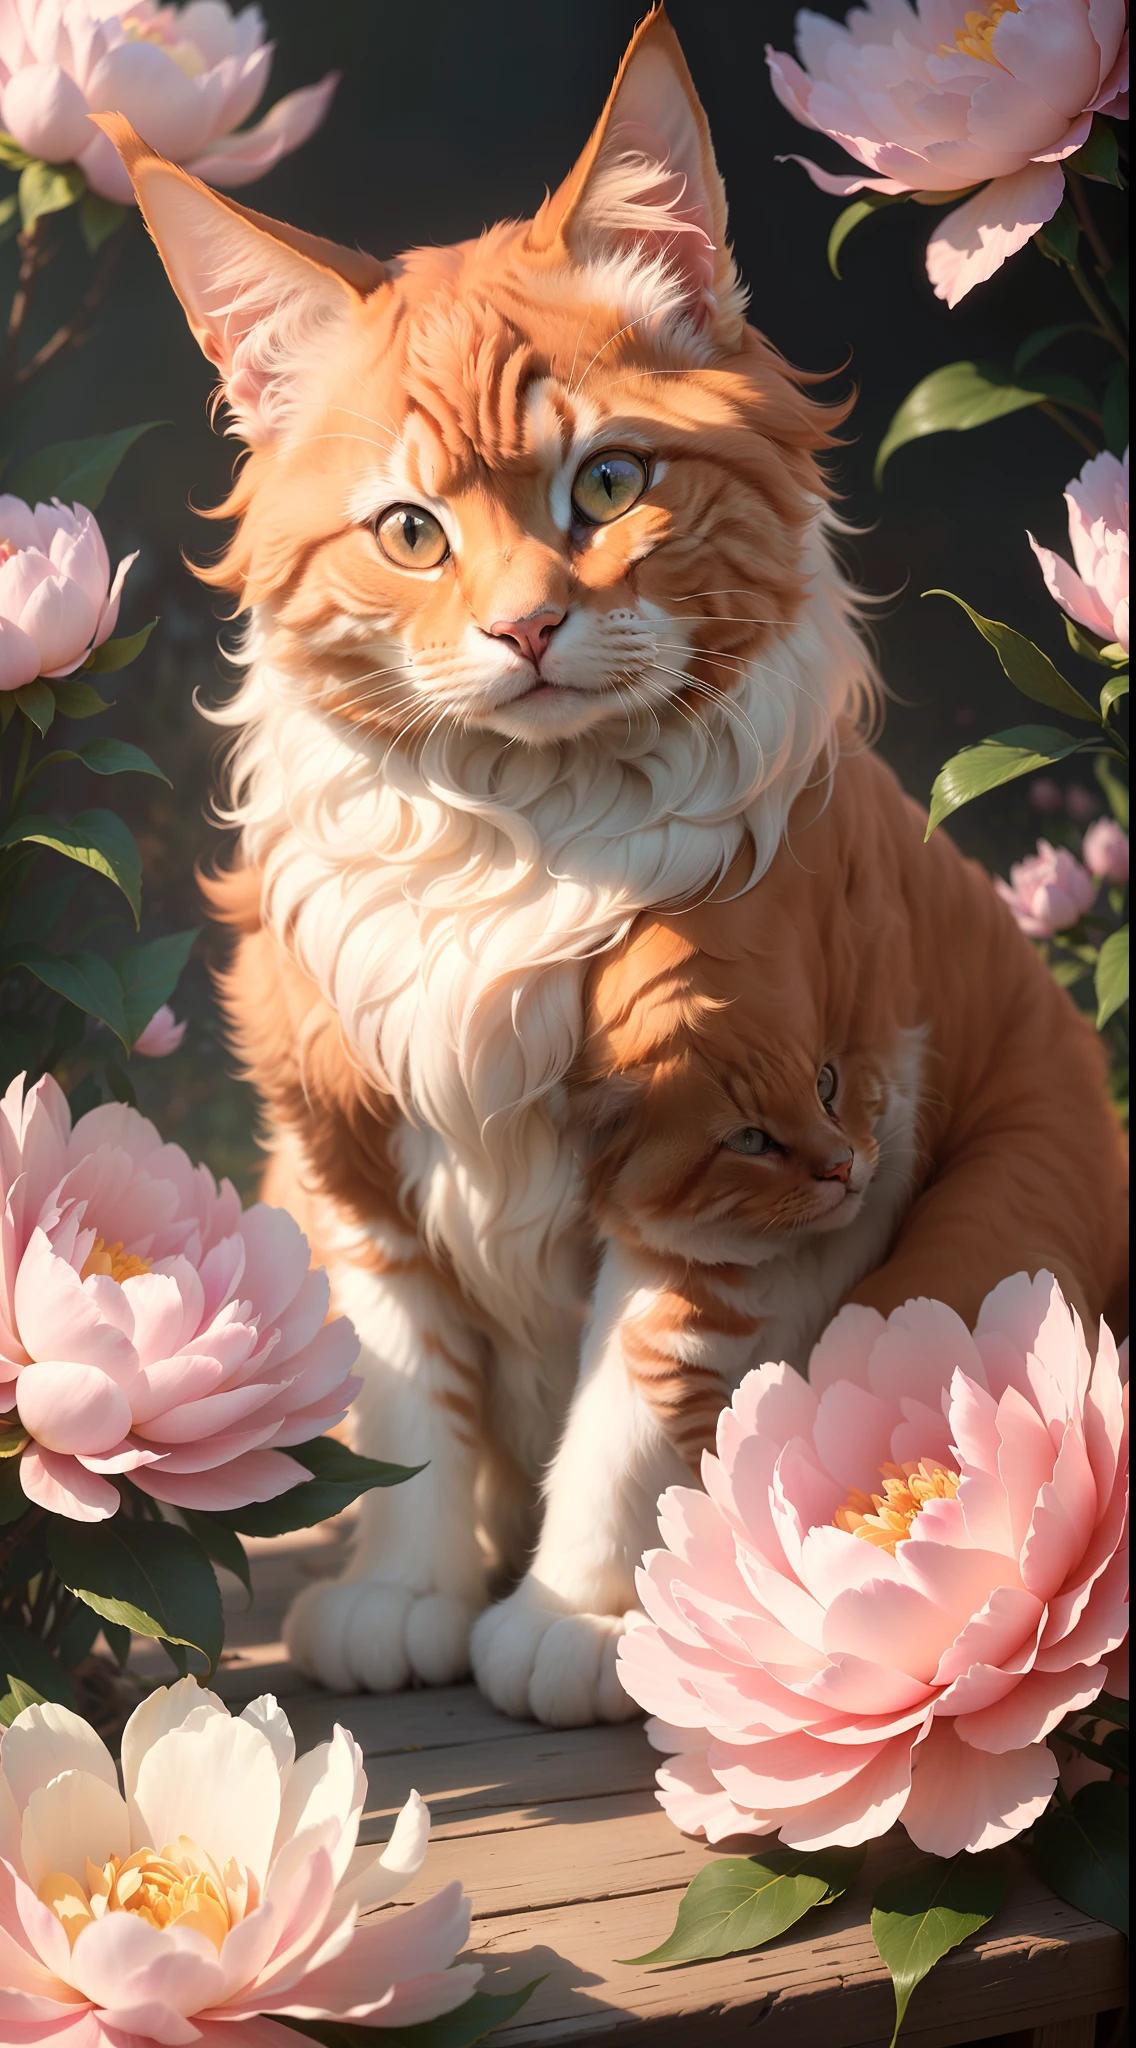 PhotographyUSA, style of Kim Keever, Ginger Cat of the maincoon breed sits among peonies, the cat's ears shine through in the sun, add more details , Masterpiece , Macro photography, no add human